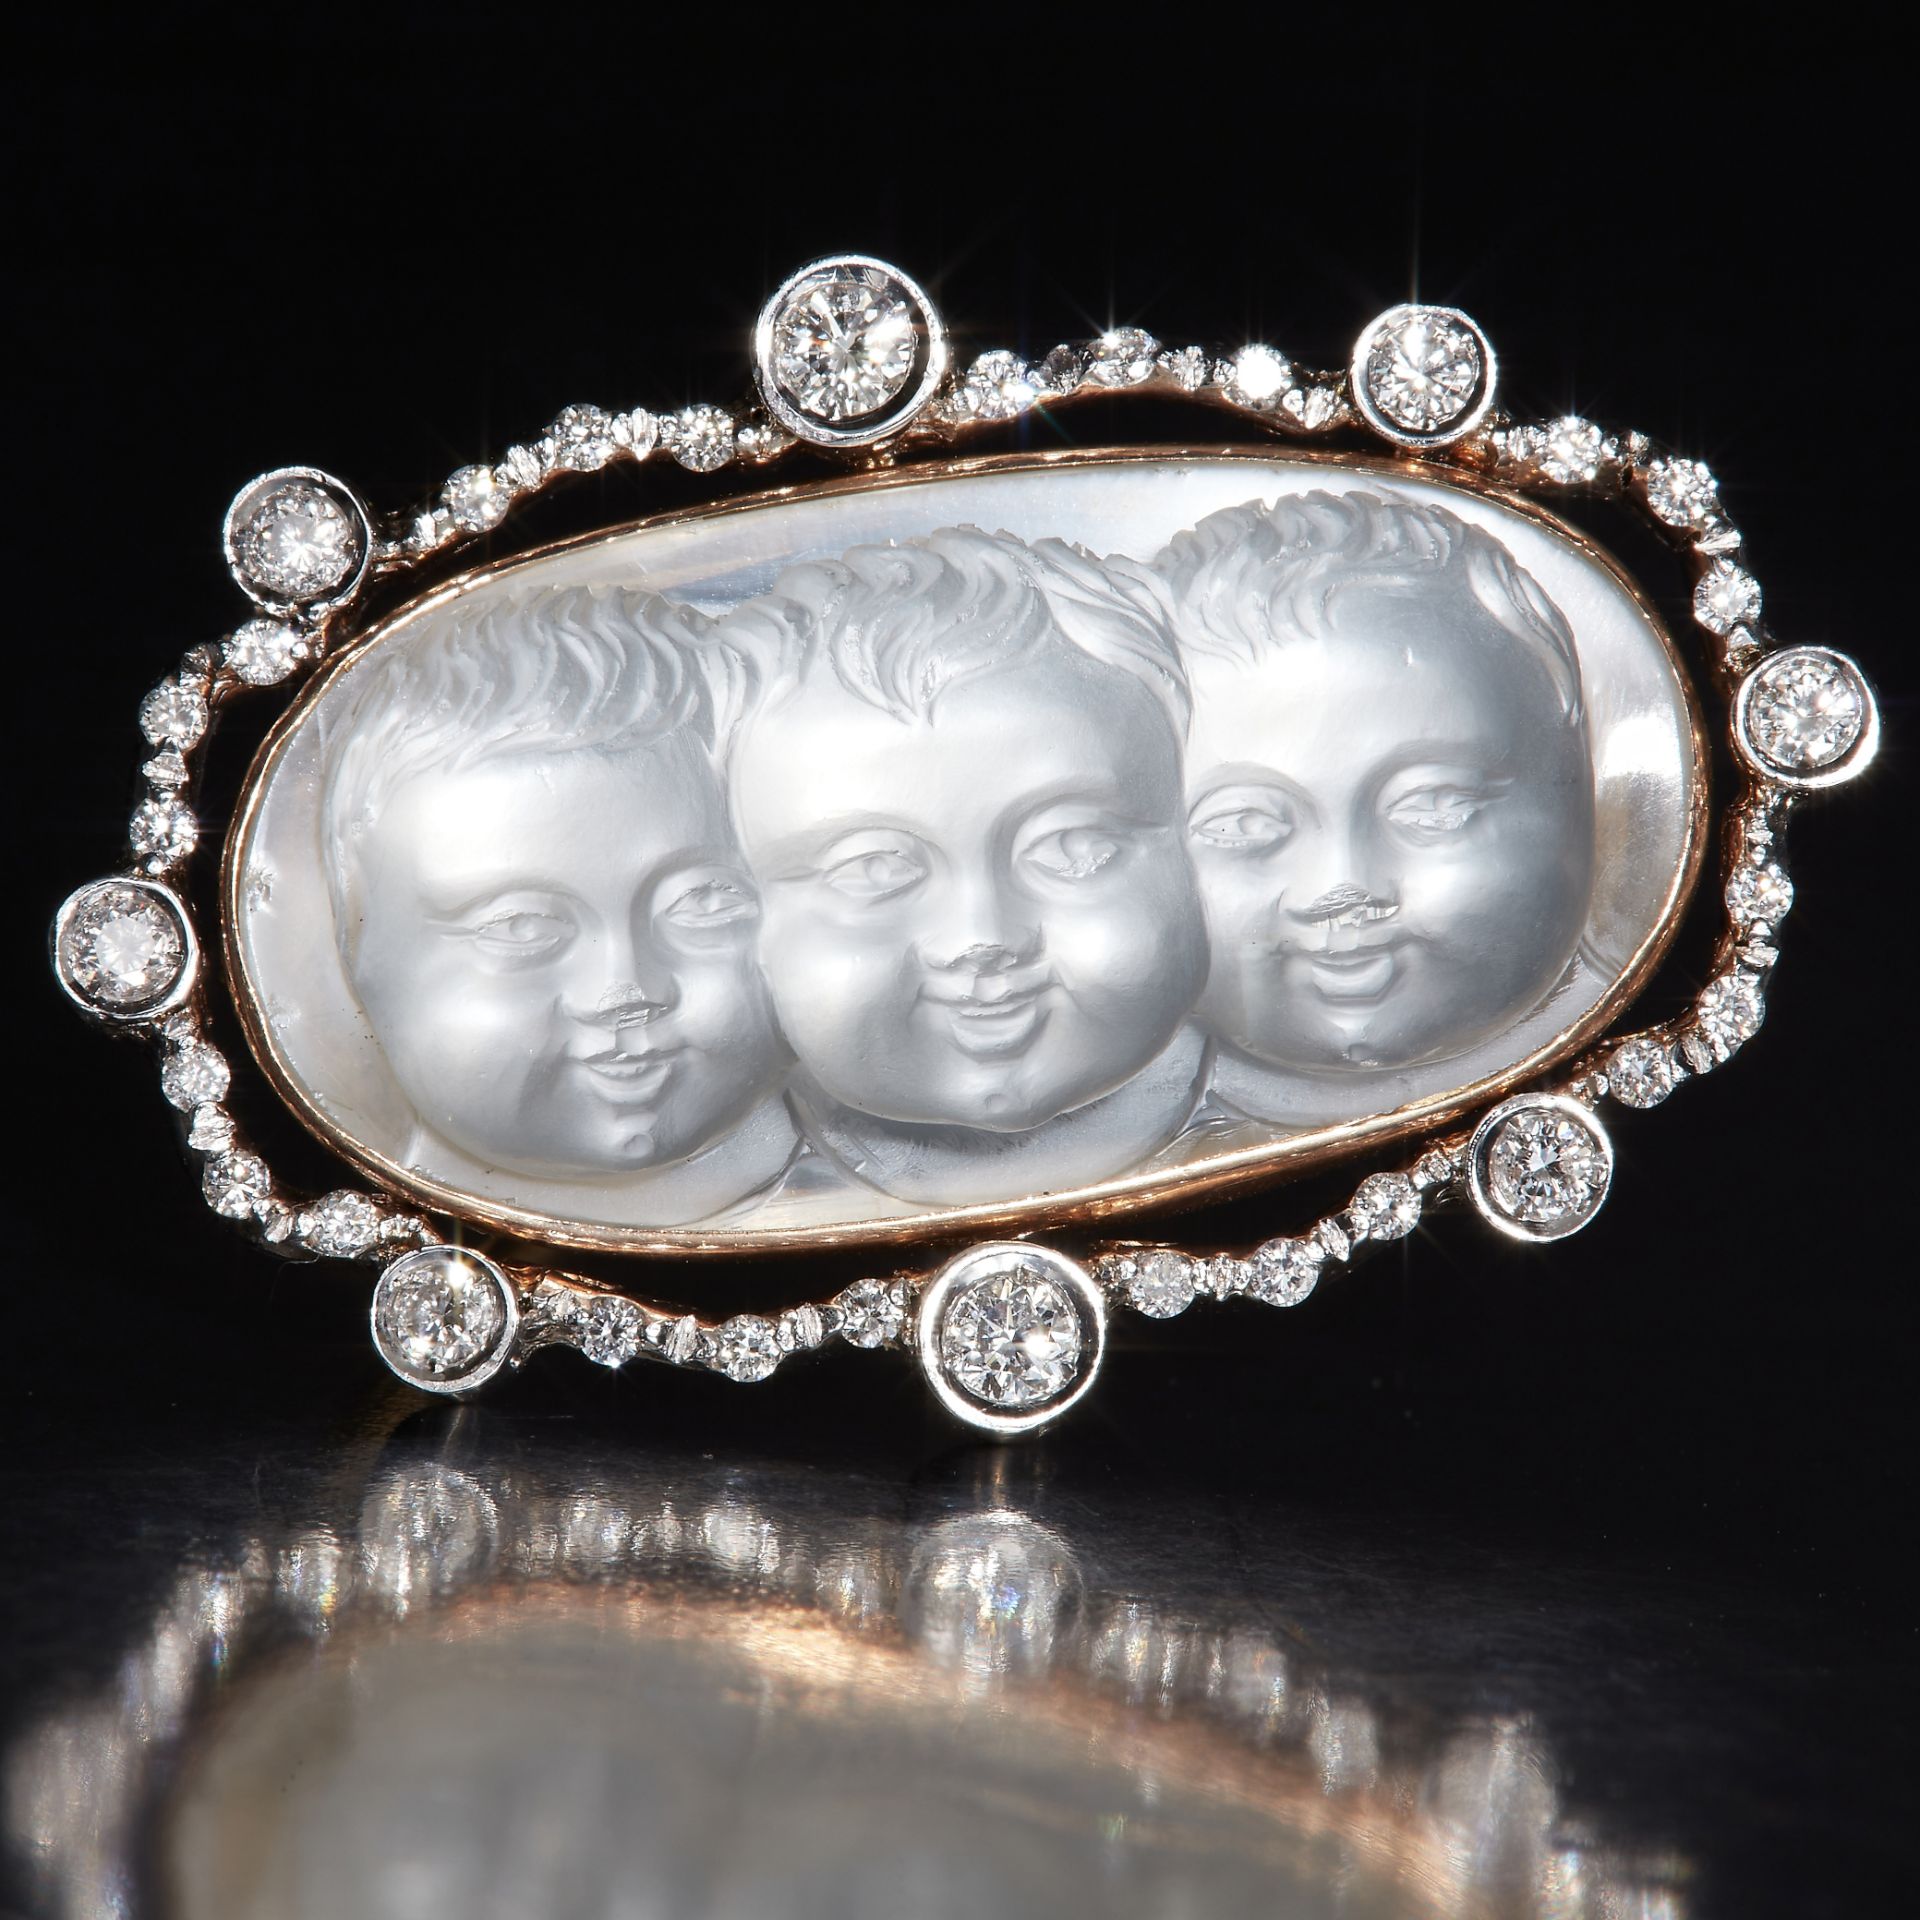 MAGNIFICENT VICTORIAN CARVED MOONSTONE AND DIAMOND BROOCH.